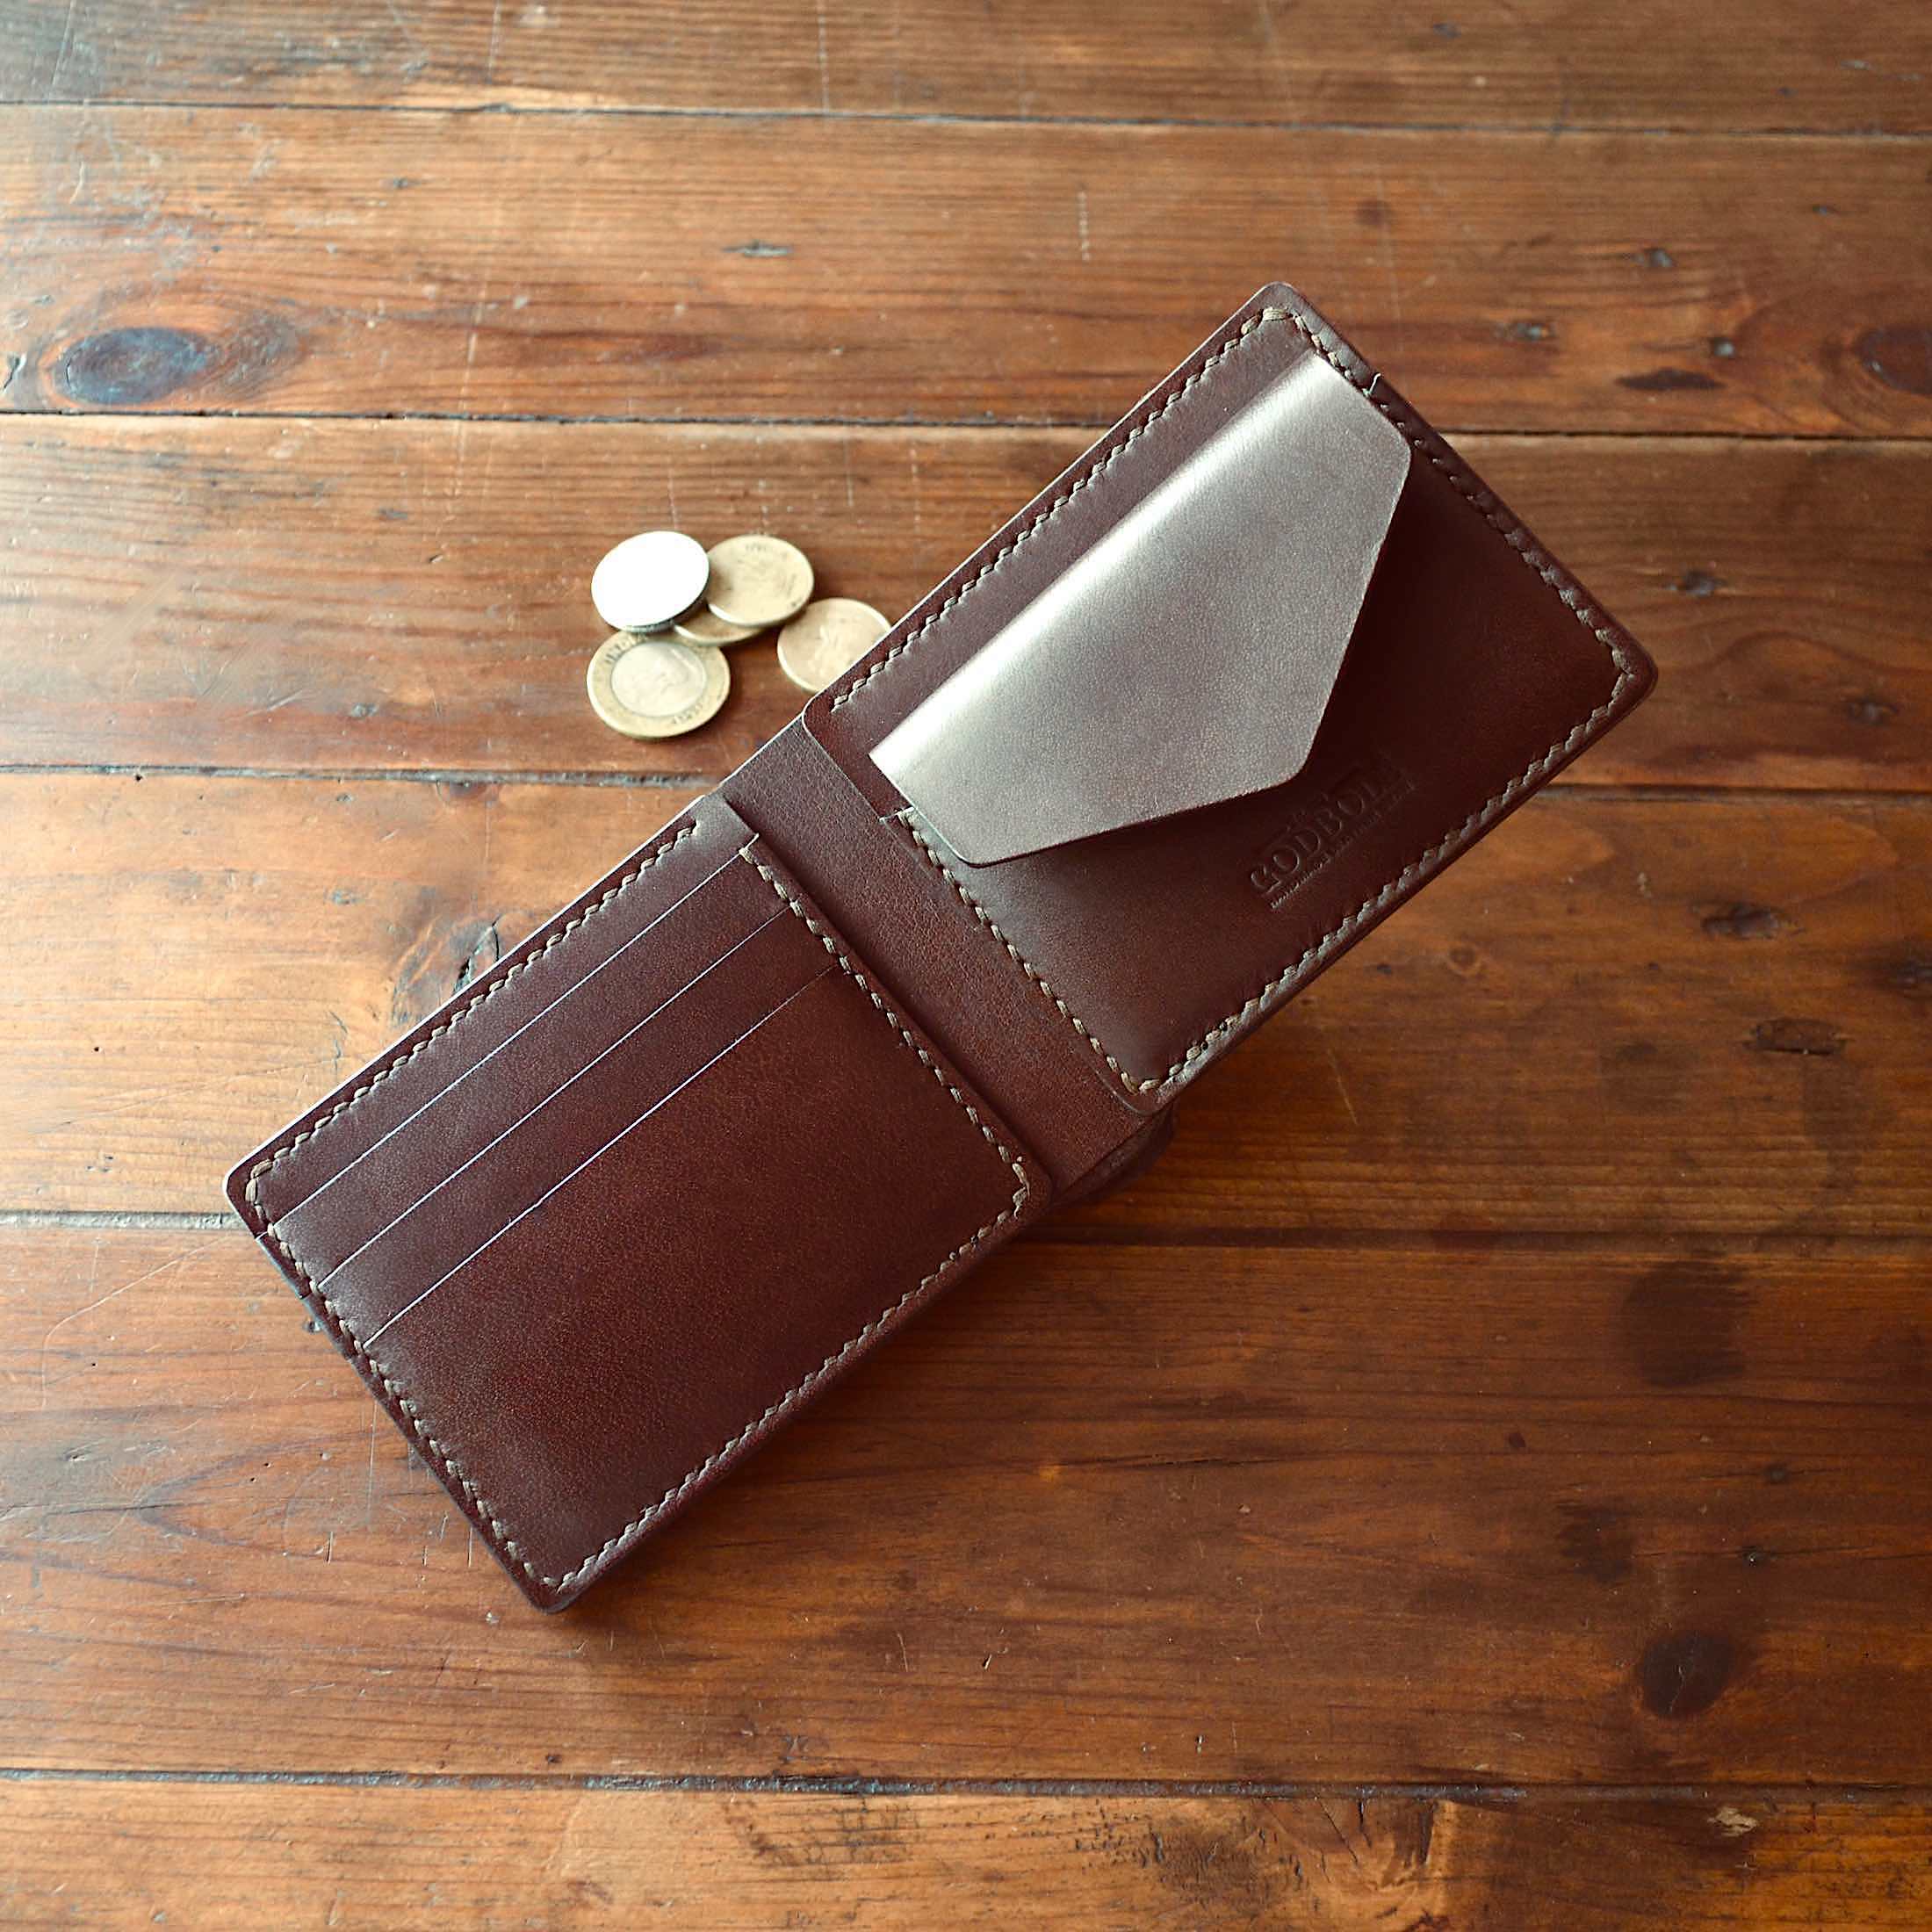 Brown Leather Coin purse | Valextra small leather goods